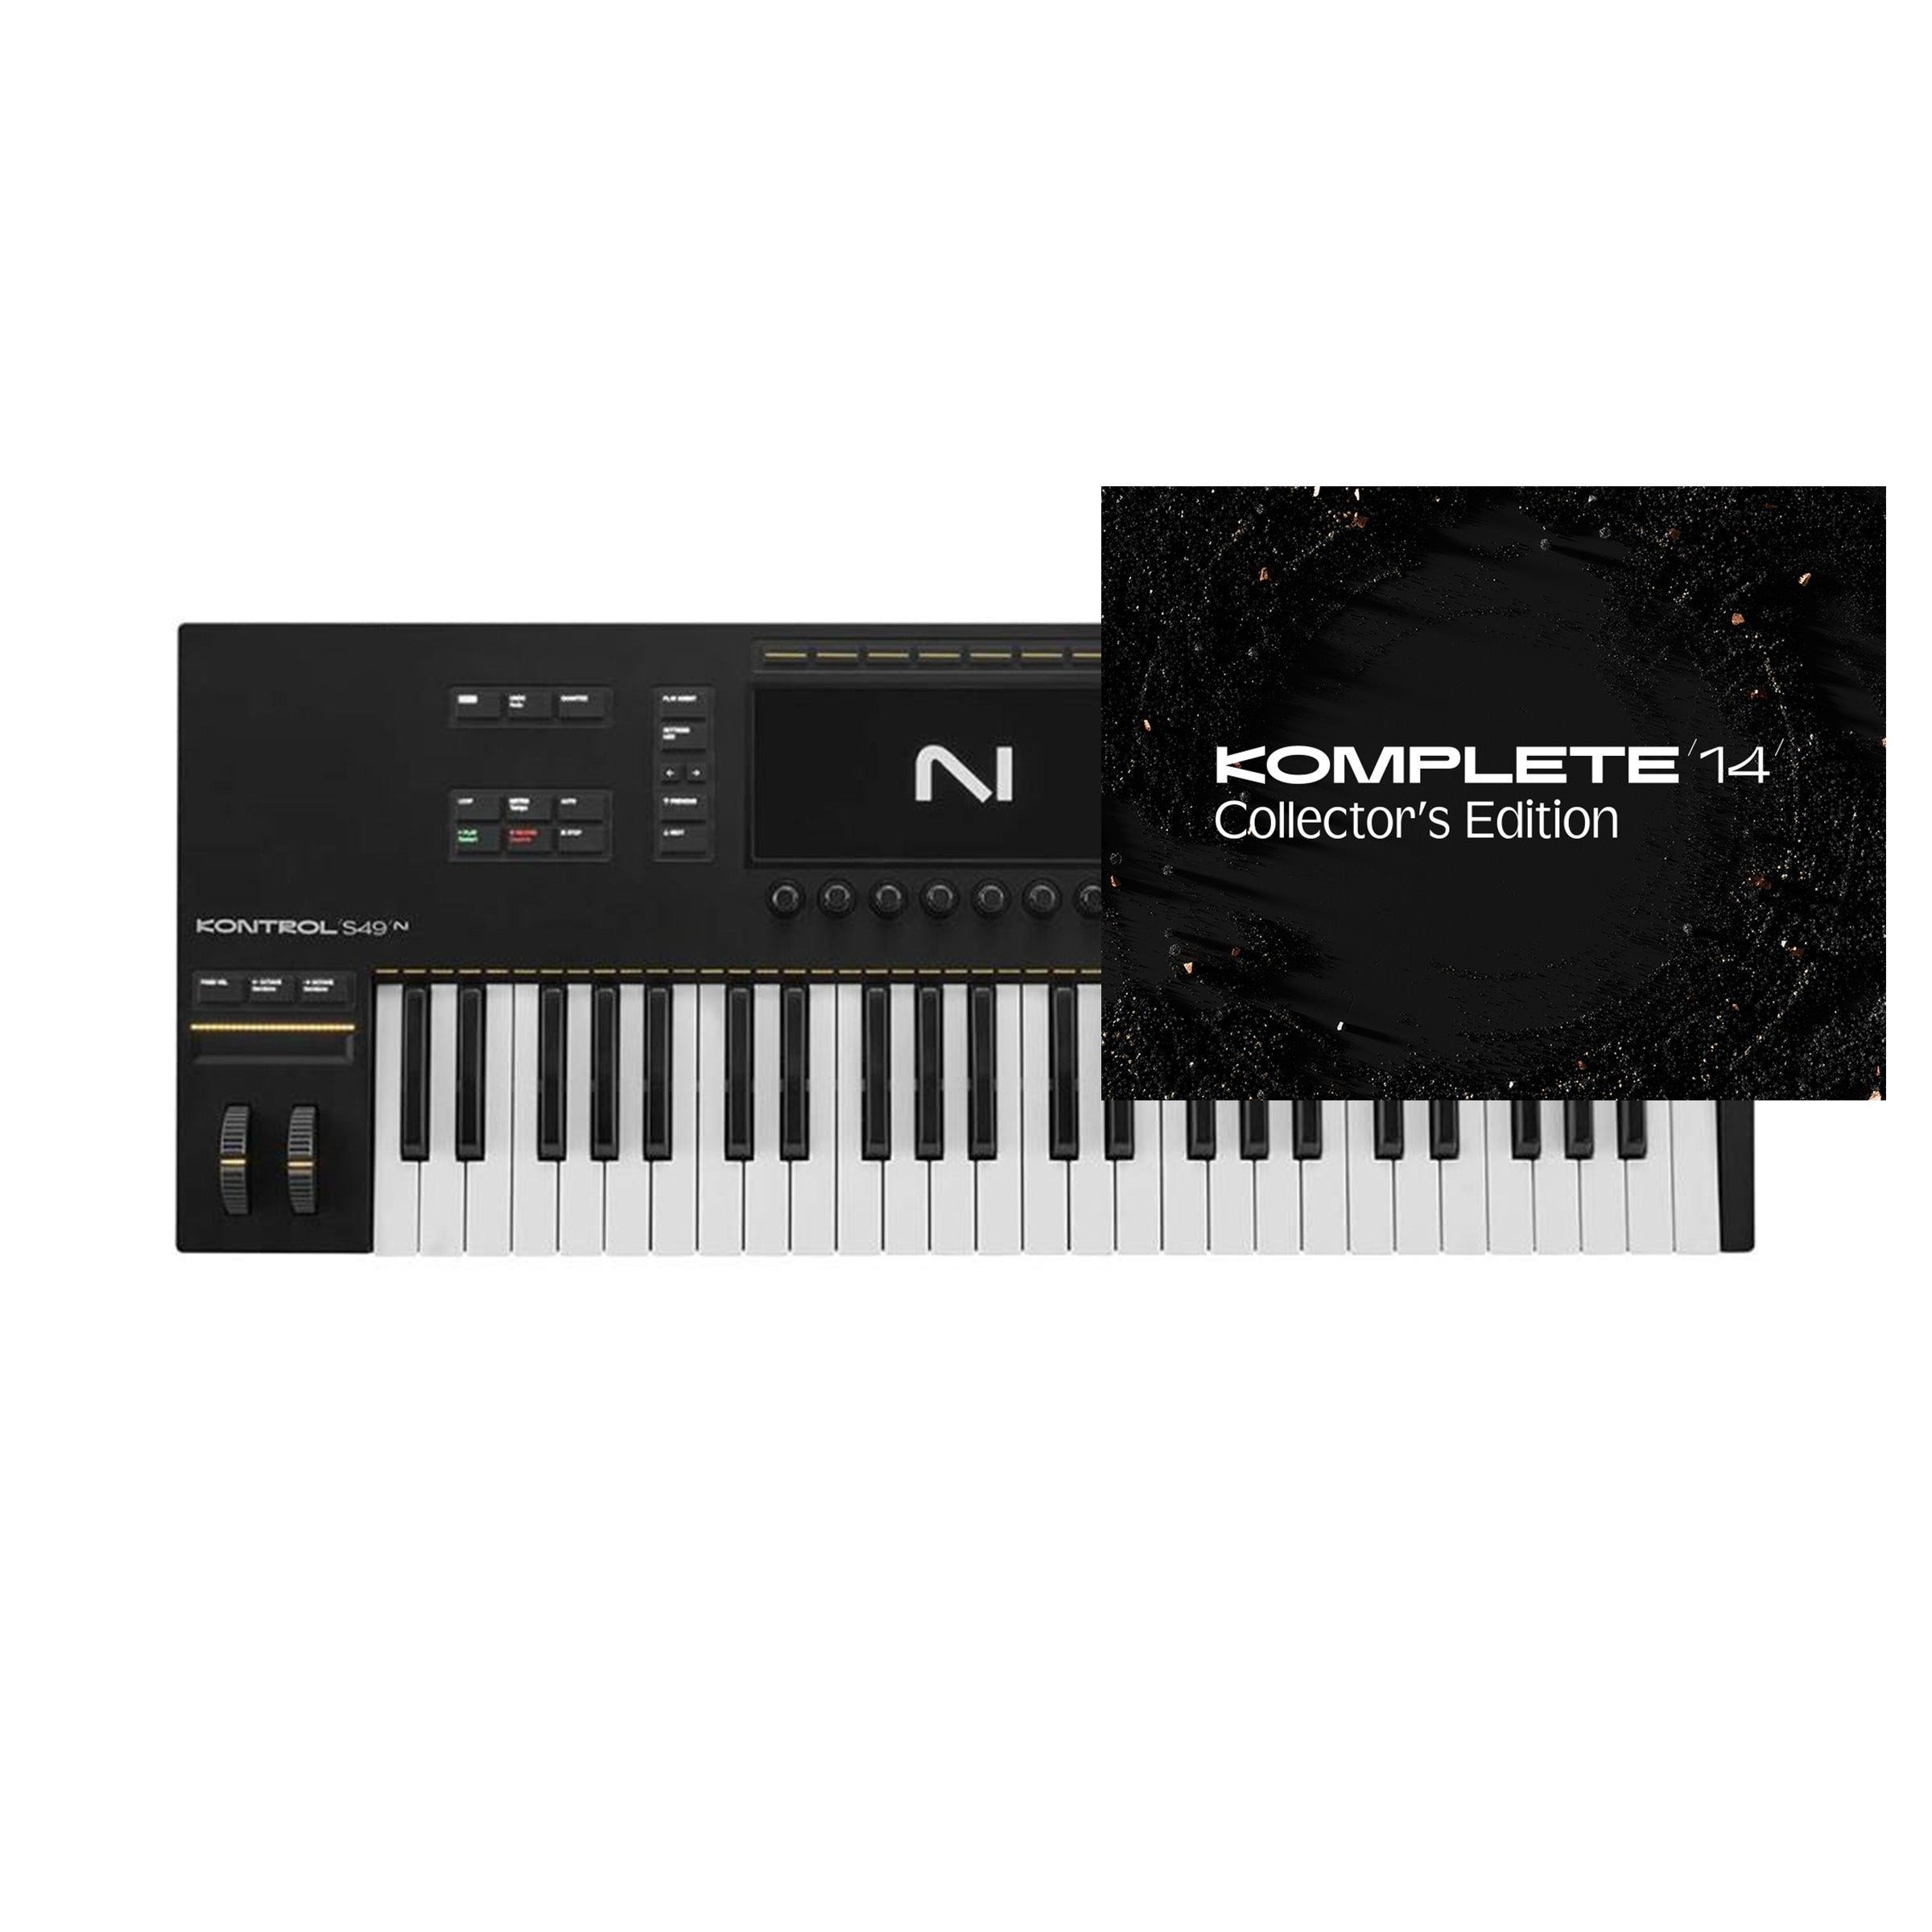 Native Instruments Kontrol S49 MK3 with Komplete 14 Collector's Edition